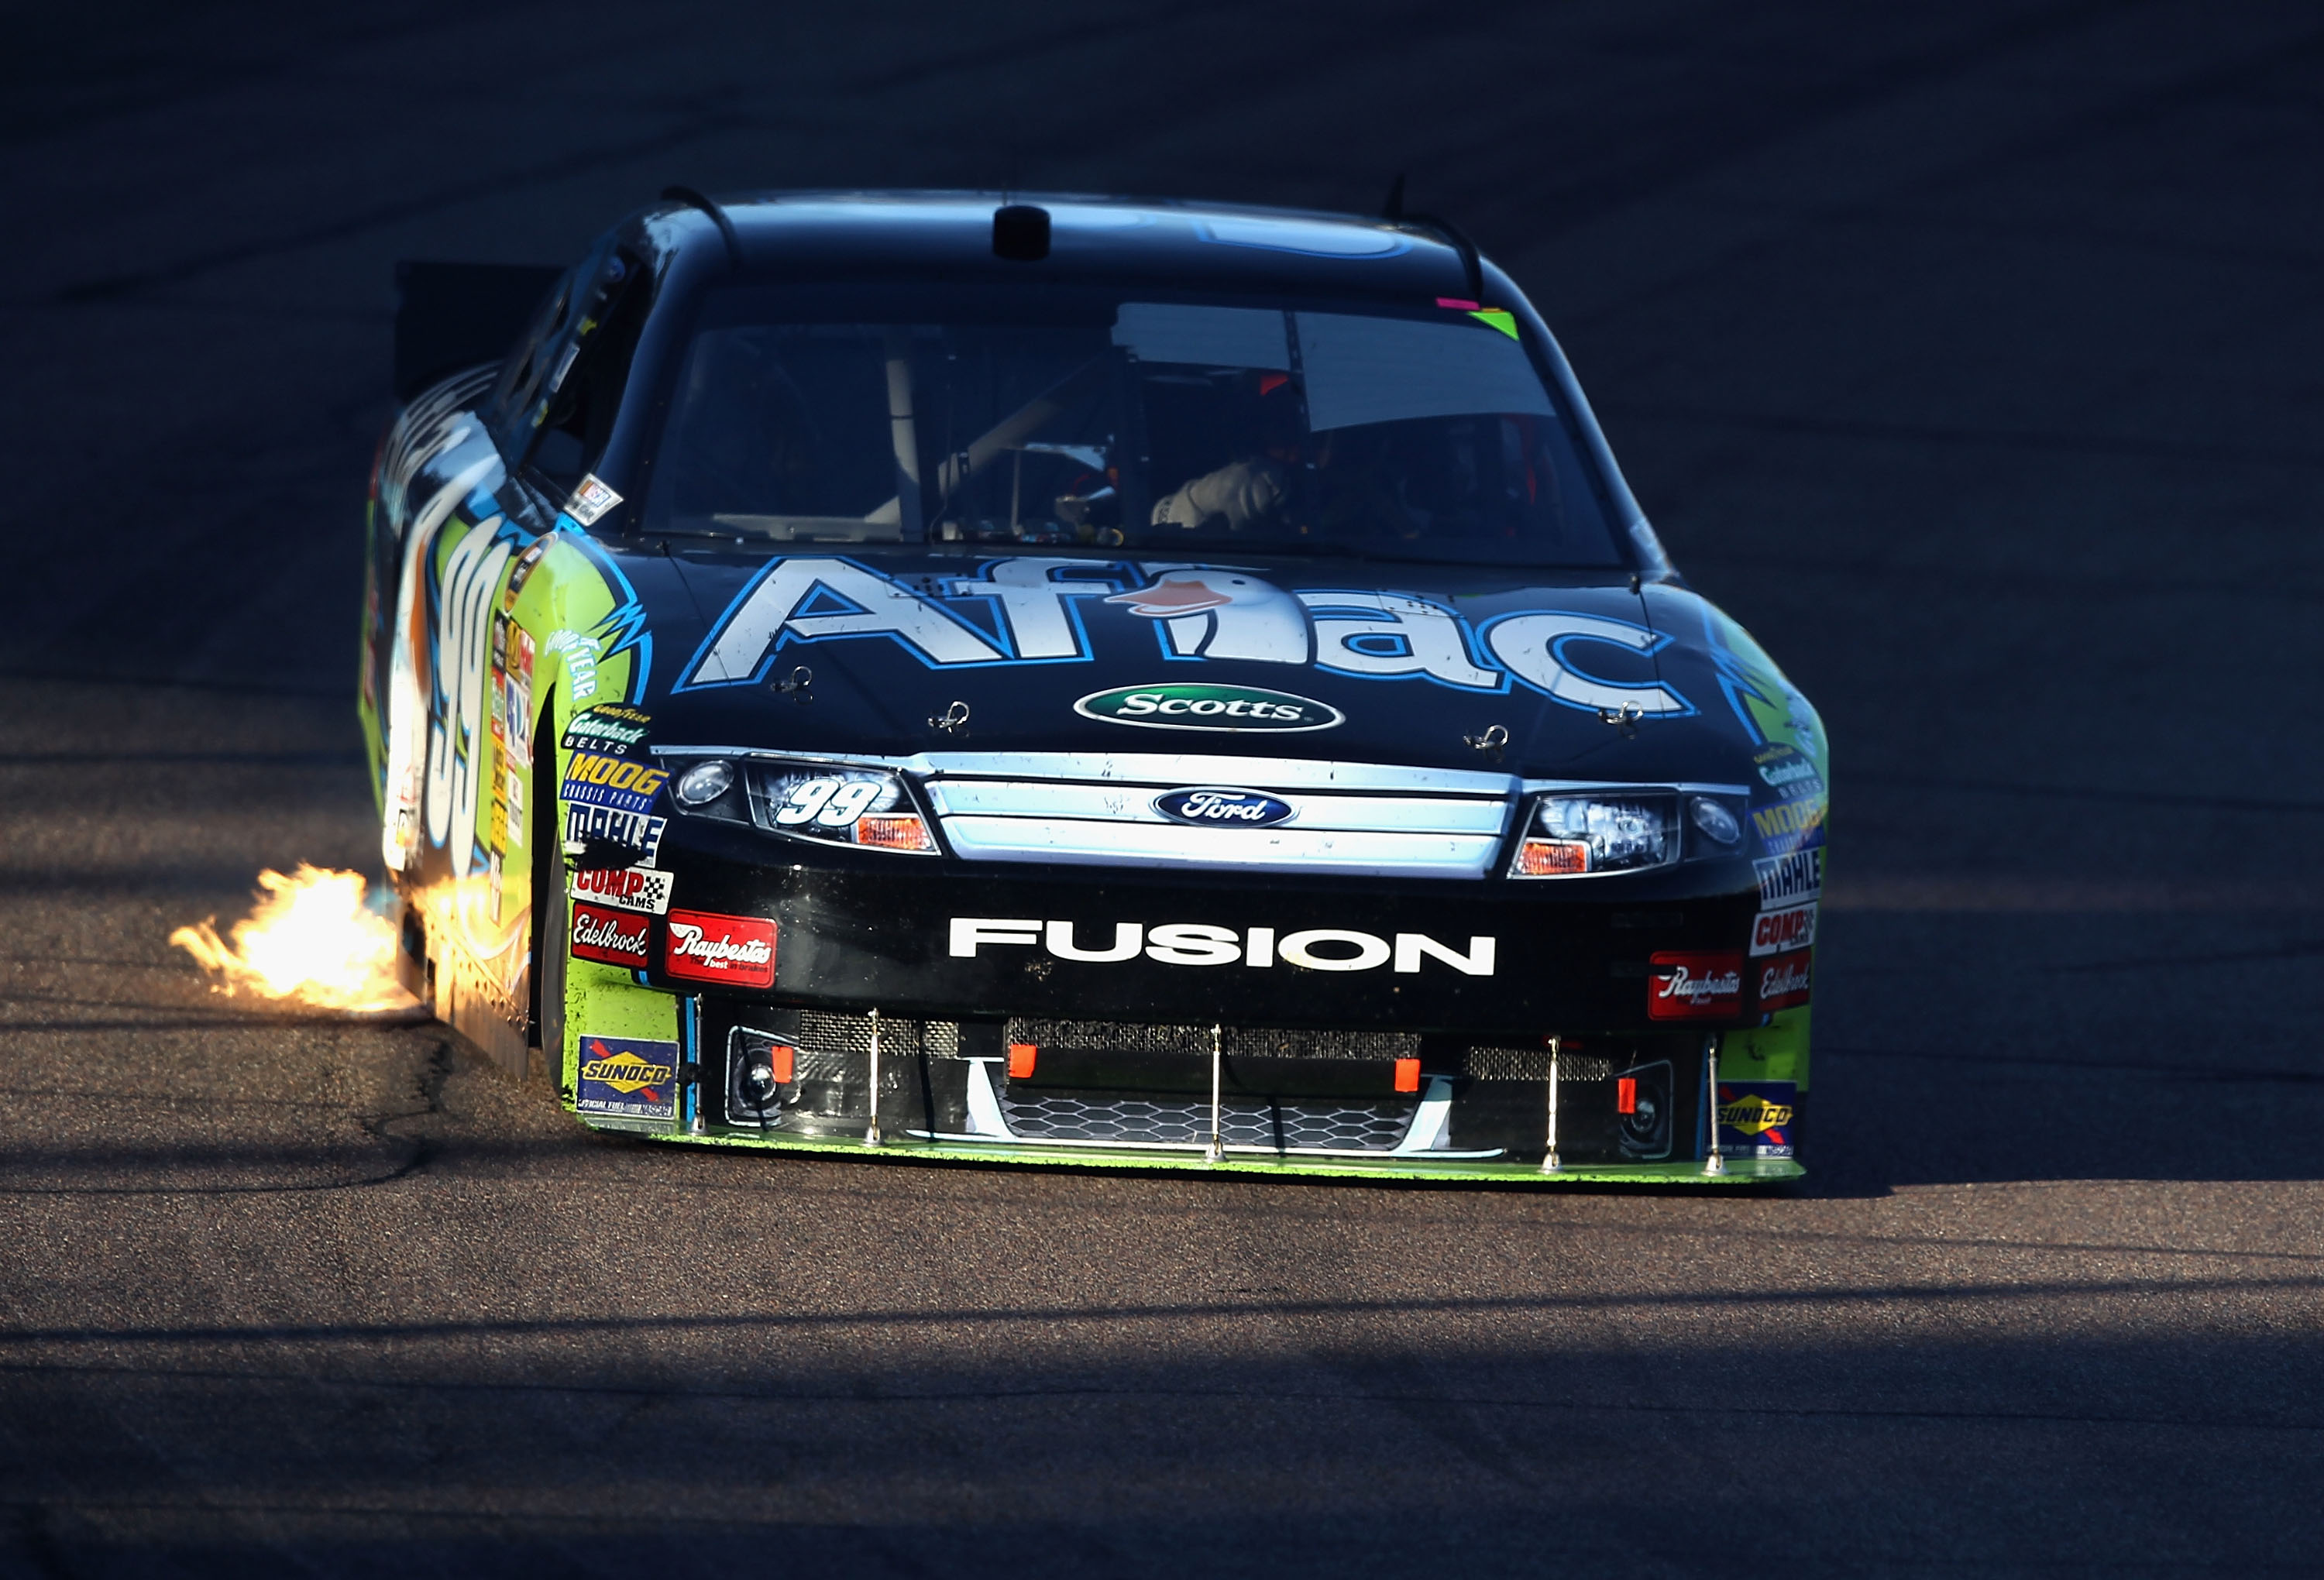 AVONDALE, AZ - NOVEMBER 14:  Carl Edwards, driver of the #99 Aflac Ford, drives during the NASCAR Sprint Cup Series Kobalt Tools 500 at Phoenix International Raceway on November 14, 2010 in Avondale, Arizona.  (Photo by Christian Petersen/Getty Images for